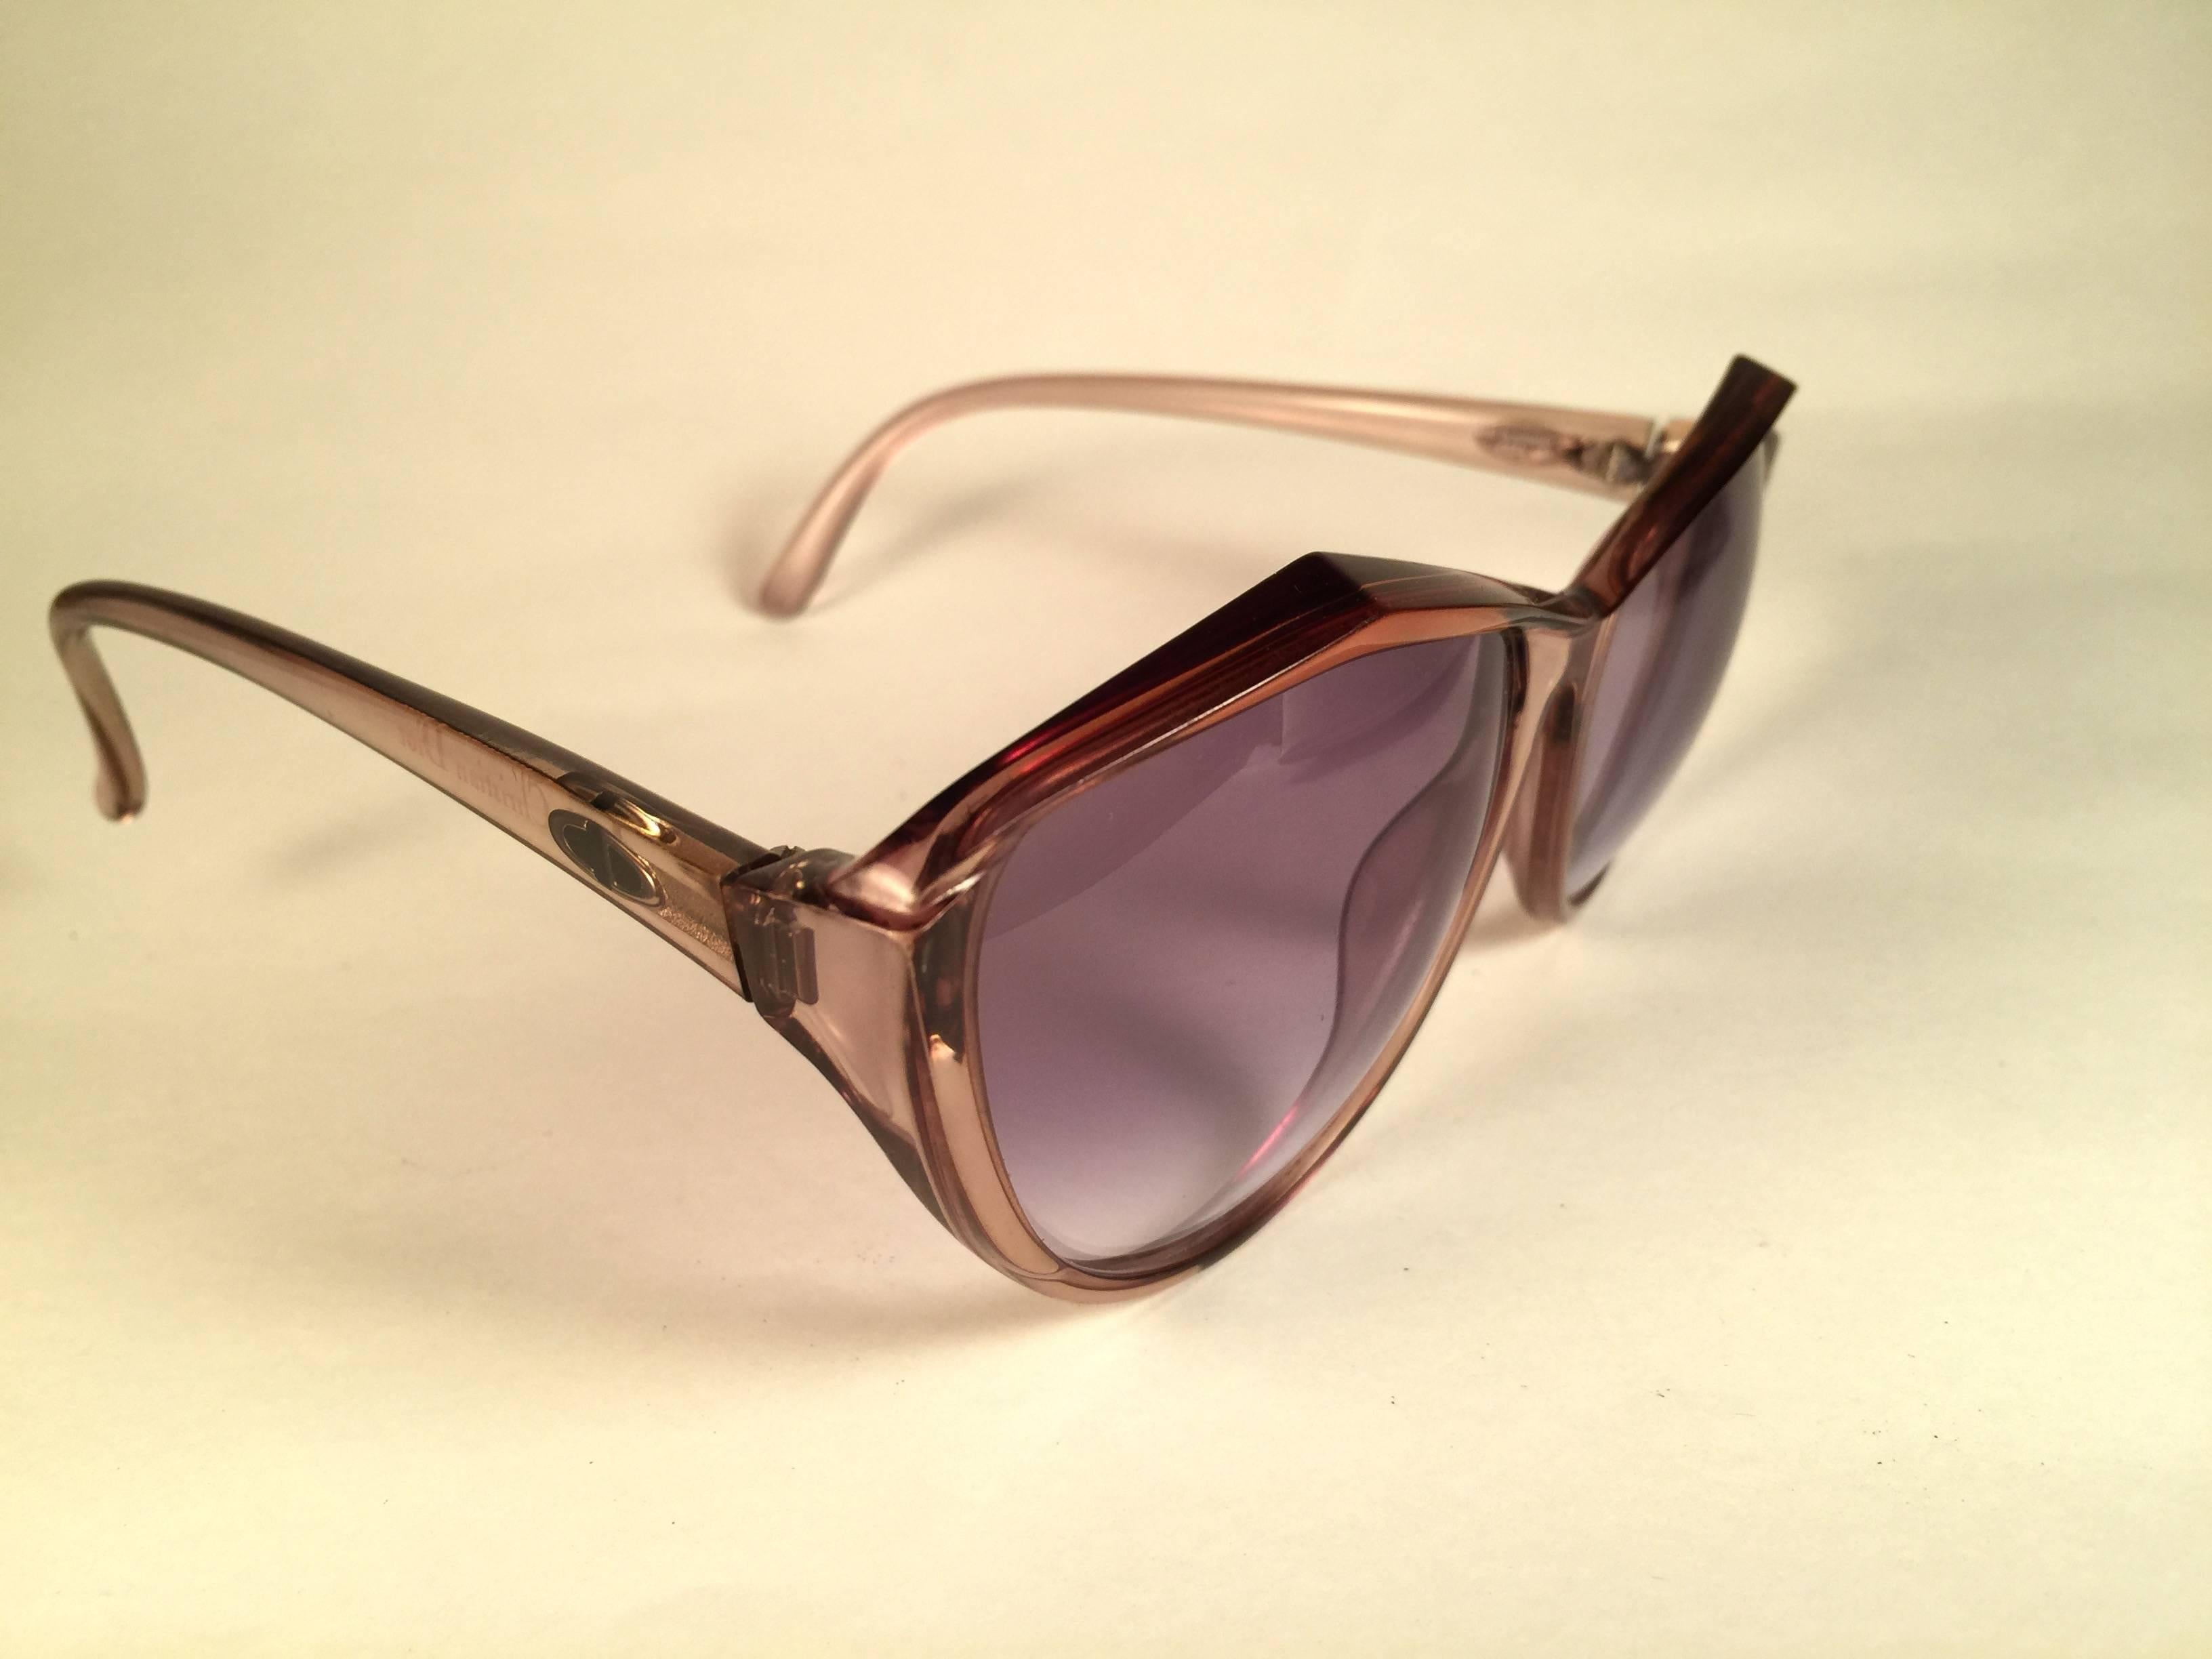 New Vintage Christian Dior 2234 Translucent frame sporting light purple gradient lenses.  
Made in Germany.  Produced and design in 1970's.  A collector’s piece!  
New, never worn or displayed. Please notice this item is nearly 50 years old so it